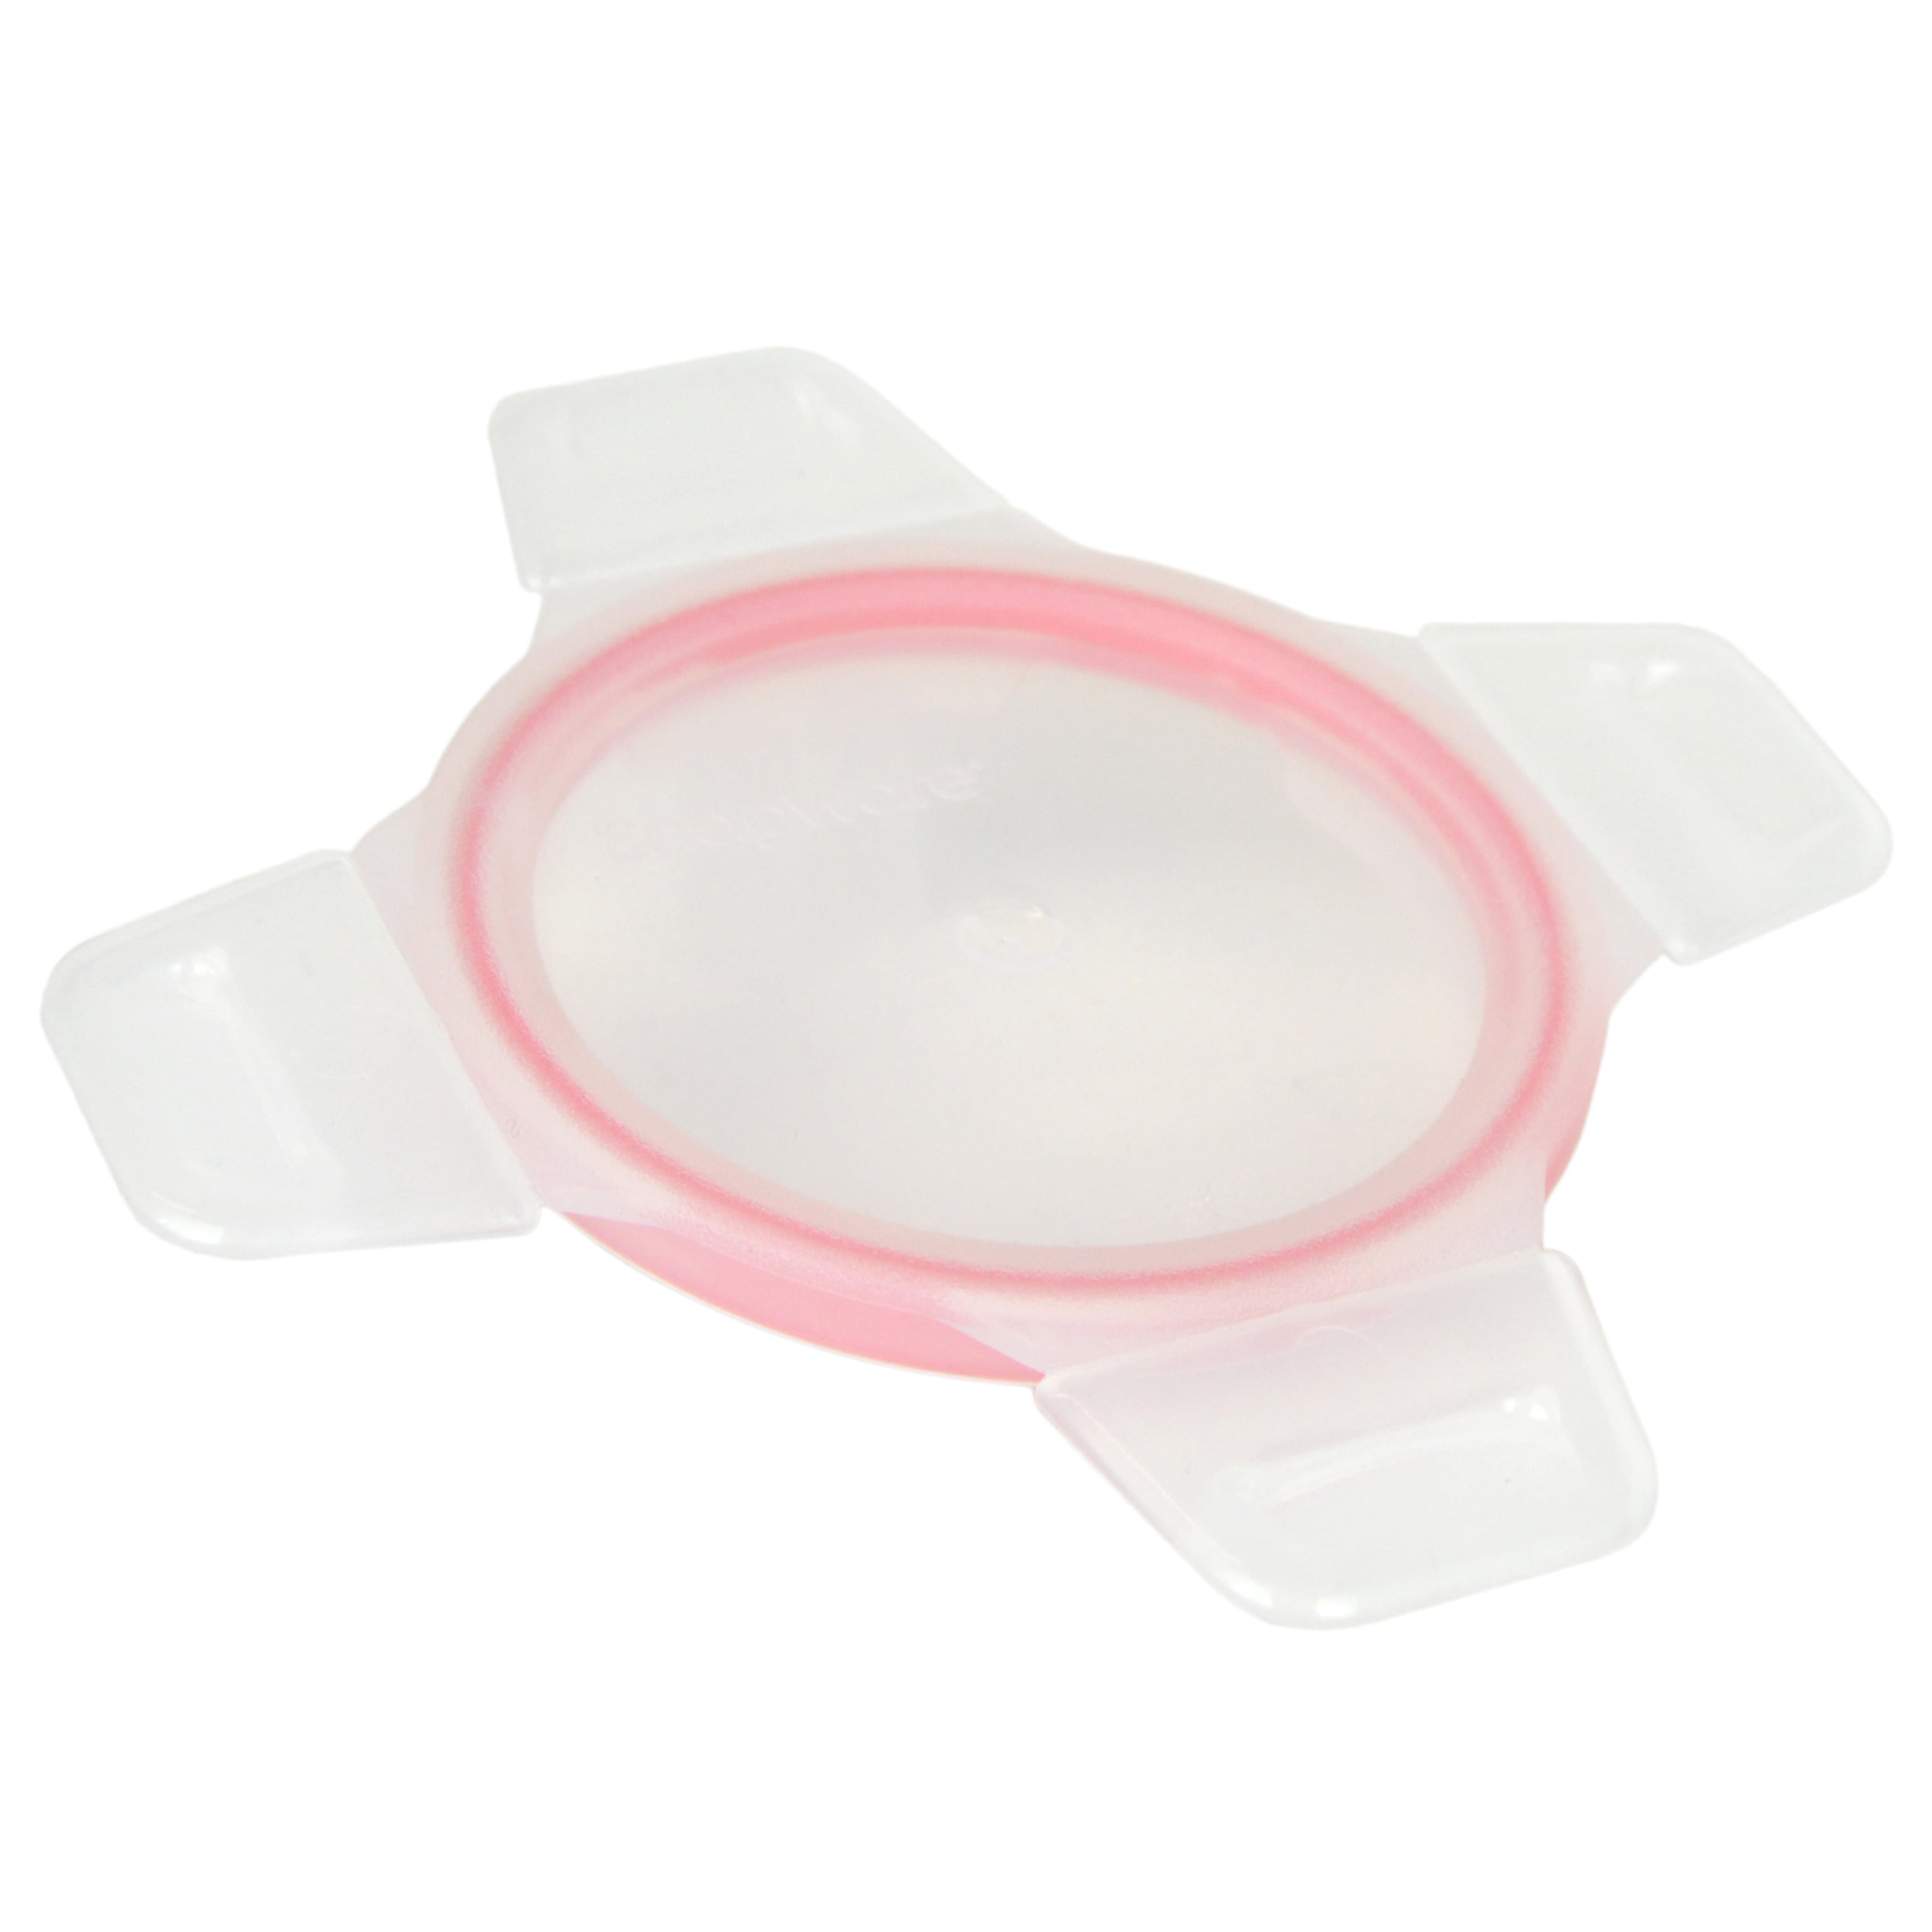 Snapware Airtight Replacement Lid 1/2-Cup Red Gasket Cover for Snapware  1/2-Cup Dish (Sold Separately)